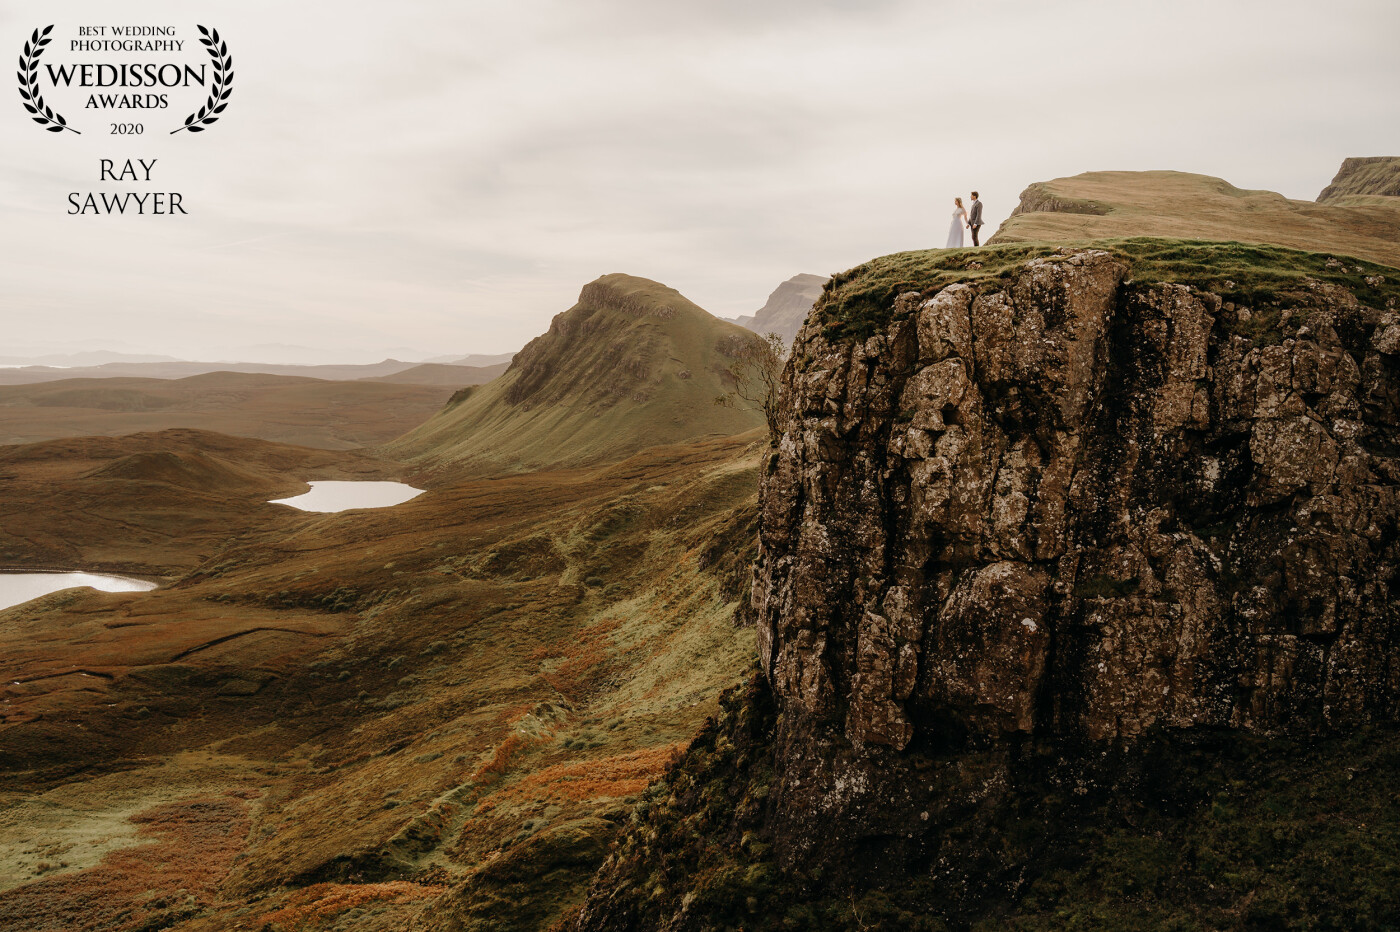 The Isle of Skye - What more can I say. This was captured on the Quiraing. The beauty of the scenery is just amazing. The 8-hour drive was certainly worth it.